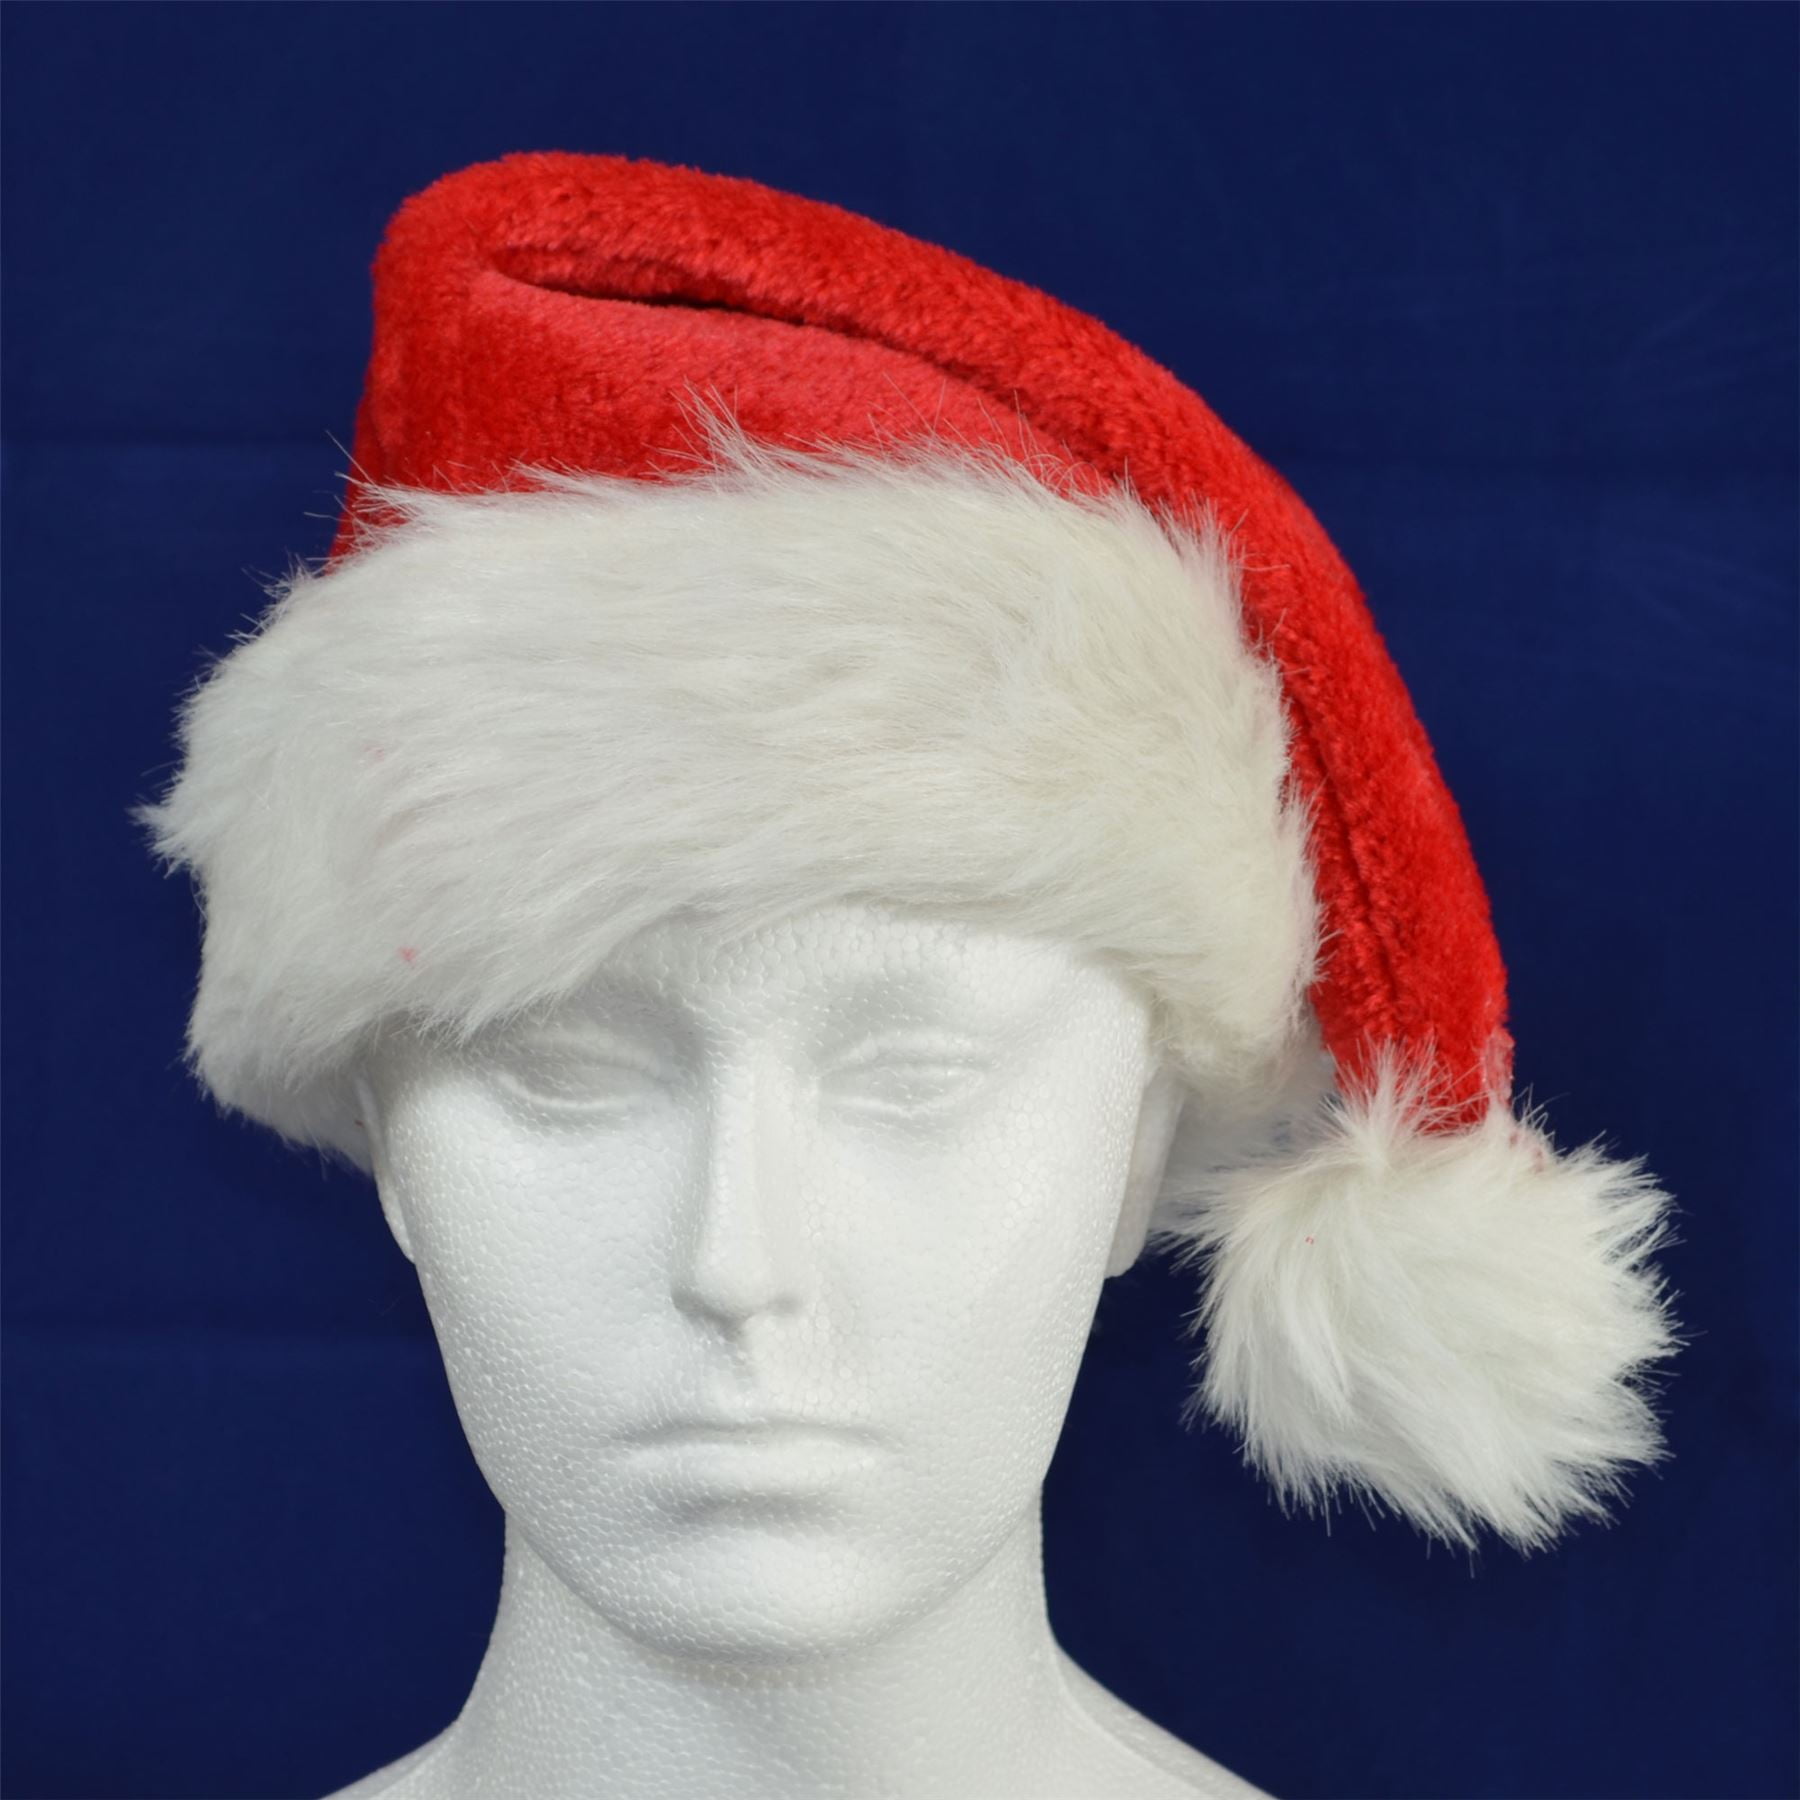 ADULTS CHRISTMAS HATS PRESENTS STOCKING FILLERS FANCY DRESS FUNNY XMAS PARTY 